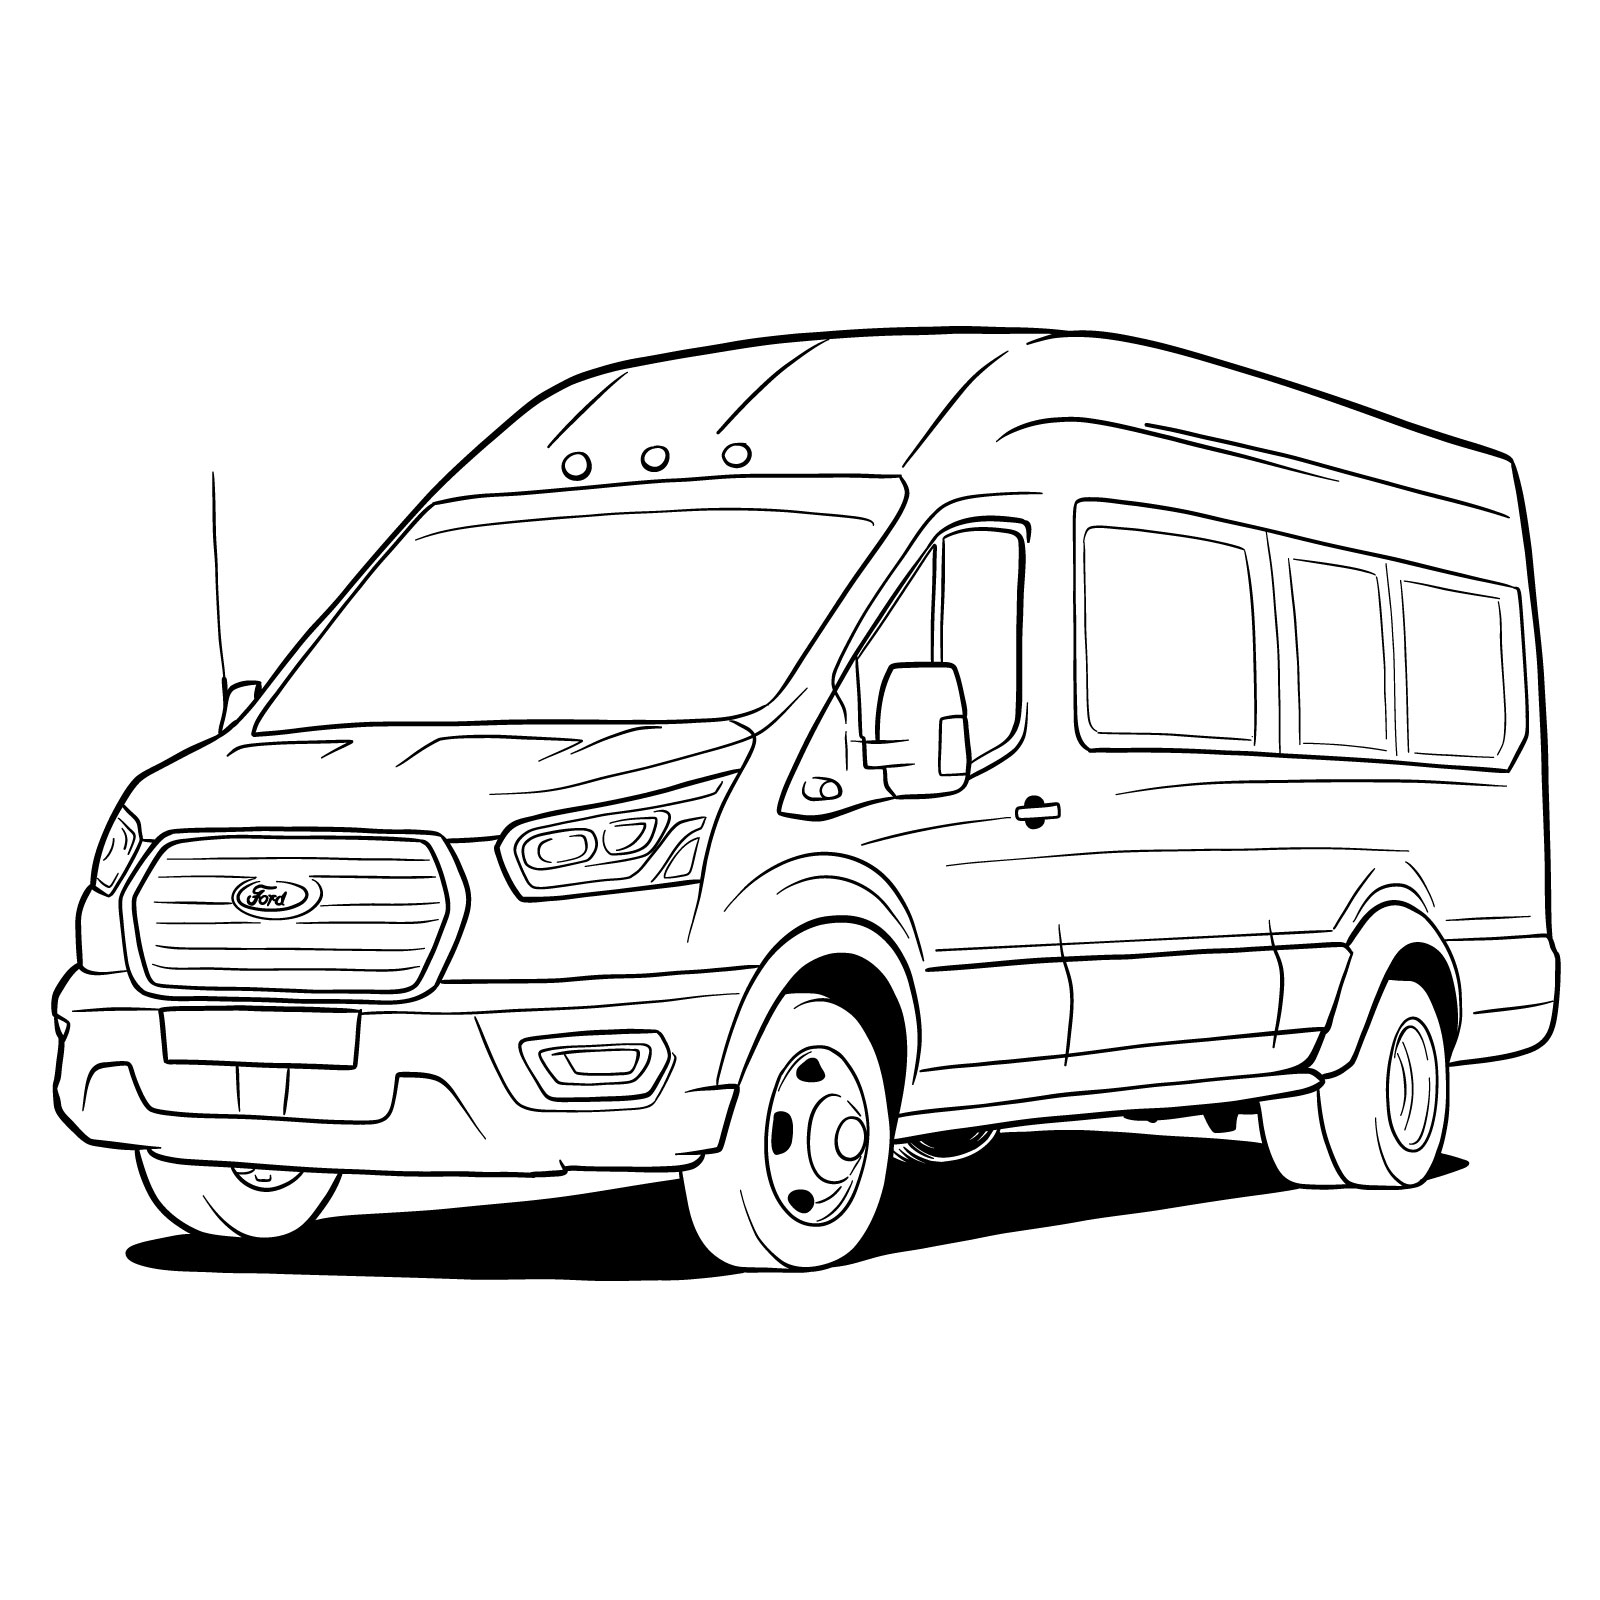 How to draw 2020 Ford Transit - final step